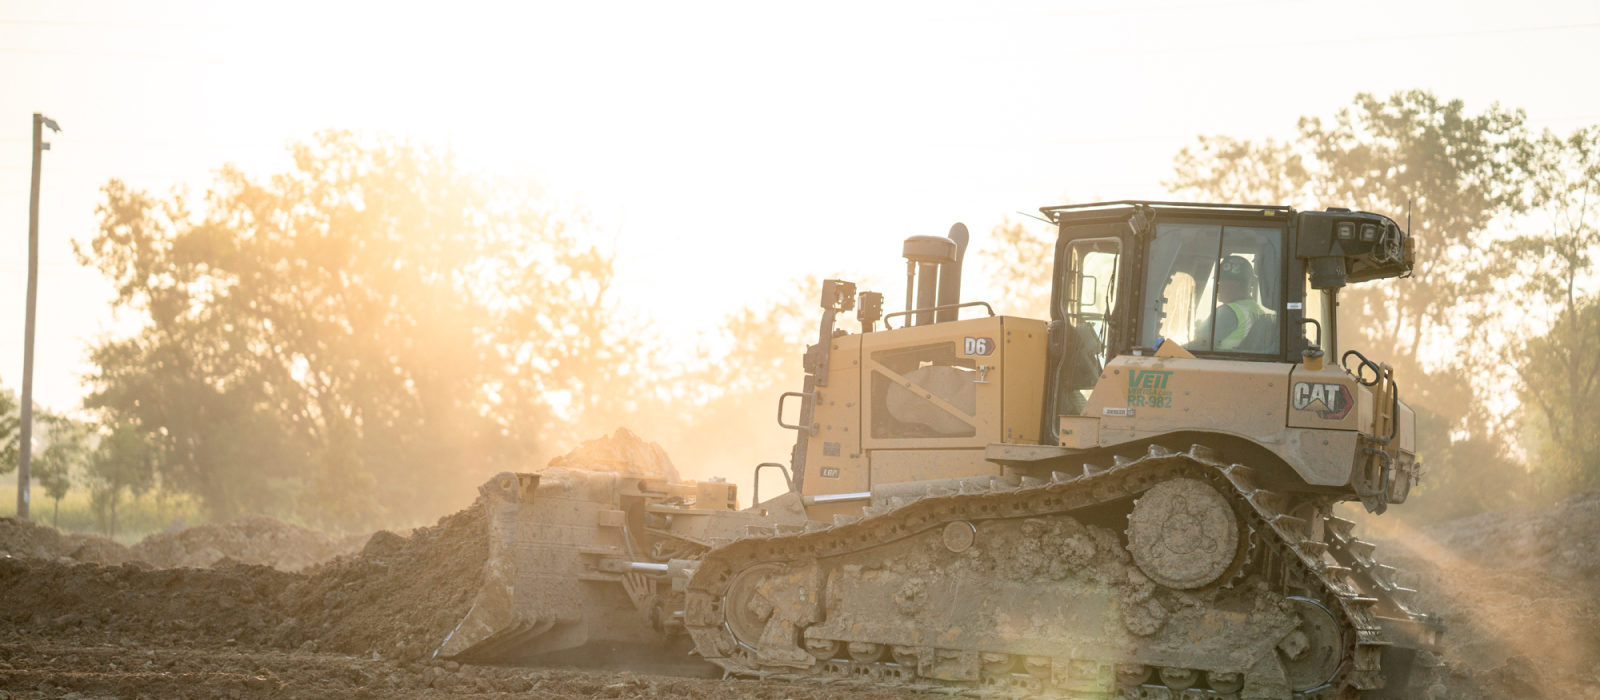 Veit Employee Moving Dirt With CAT D6